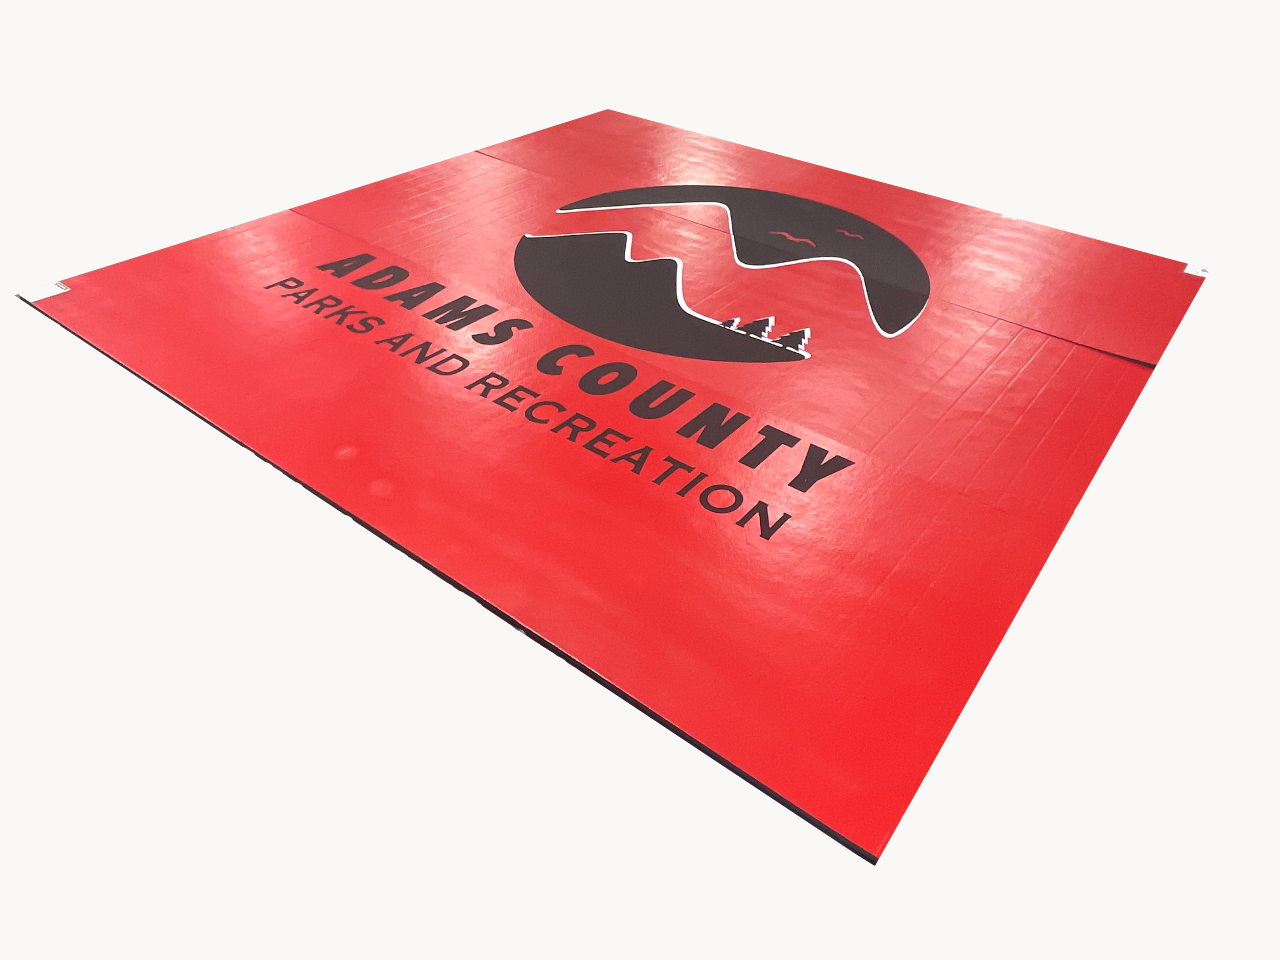 Your Design Digitally Printed 12' x 12' roll up light weight wrestling mat